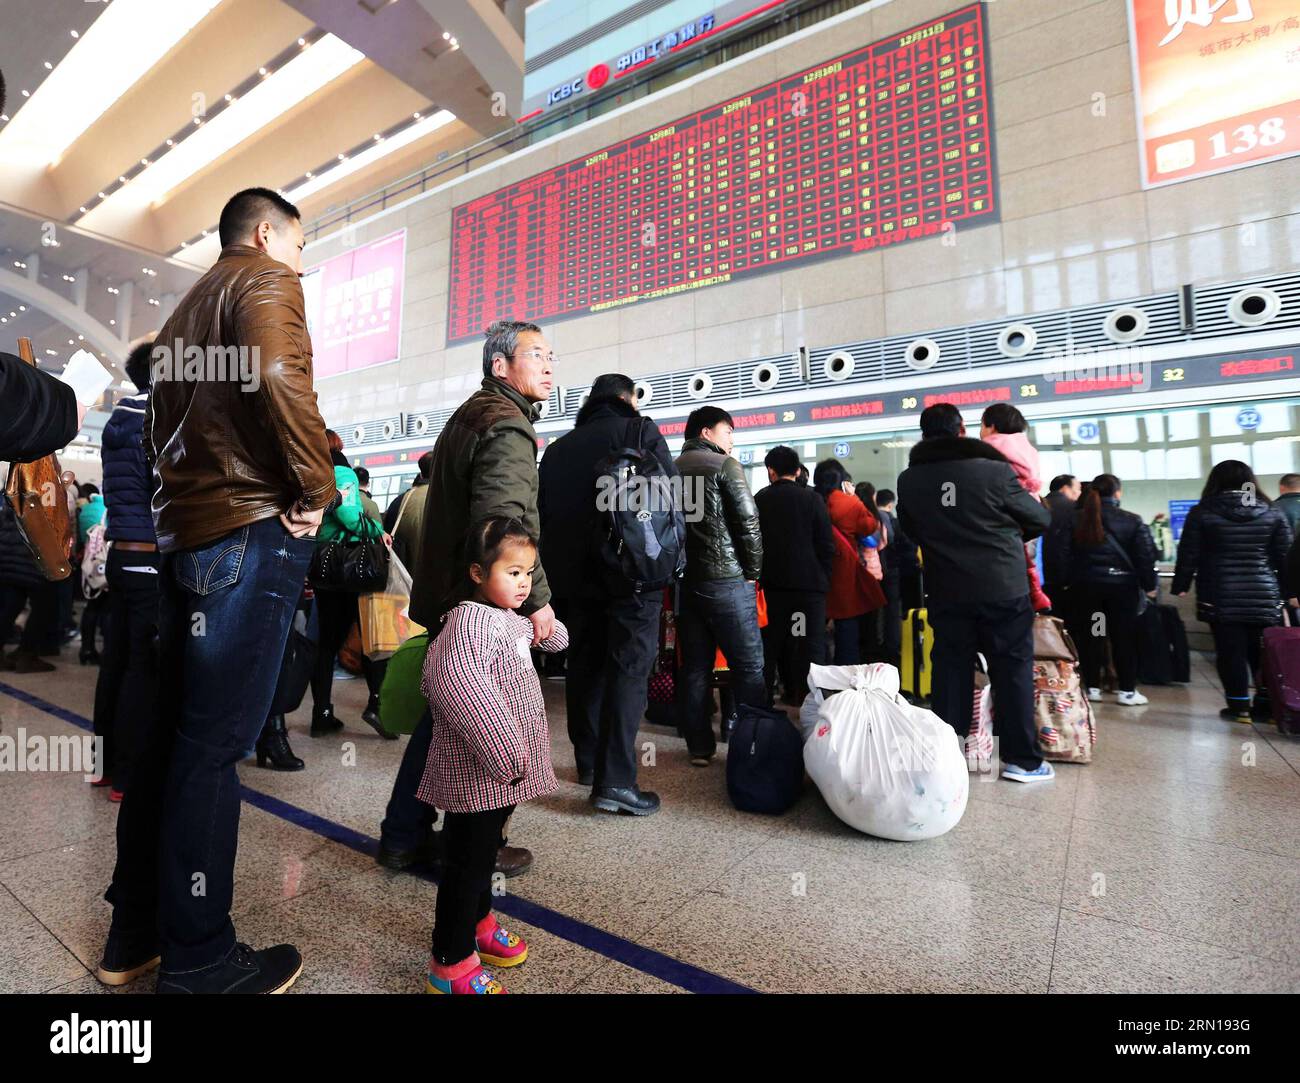 Passengers buy tickets at Shijiazhuang Railway Station in Shijiazhuang, capital of north China s Hebei Province, Dec. 7, 2014. China Railway Corporation (CRC), operator of China s rail network, started to sell train tickets for the 40-day travel period known as chunyun on Sunday . Chunyun , sometimes called the world s largest human migration, is the hectic travel period surrounding Chinese New Year. This year, chunyun will begin on Feb. 4 and last until March 16. ) (hdt) CHINA-RAILWAY-TICKET (CN) ZhengxRongxi PUBLICATIONxNOTxINxCHN   Passengers Buy Tickets AT Shijiazhuang Railway Station in S Stock Photo